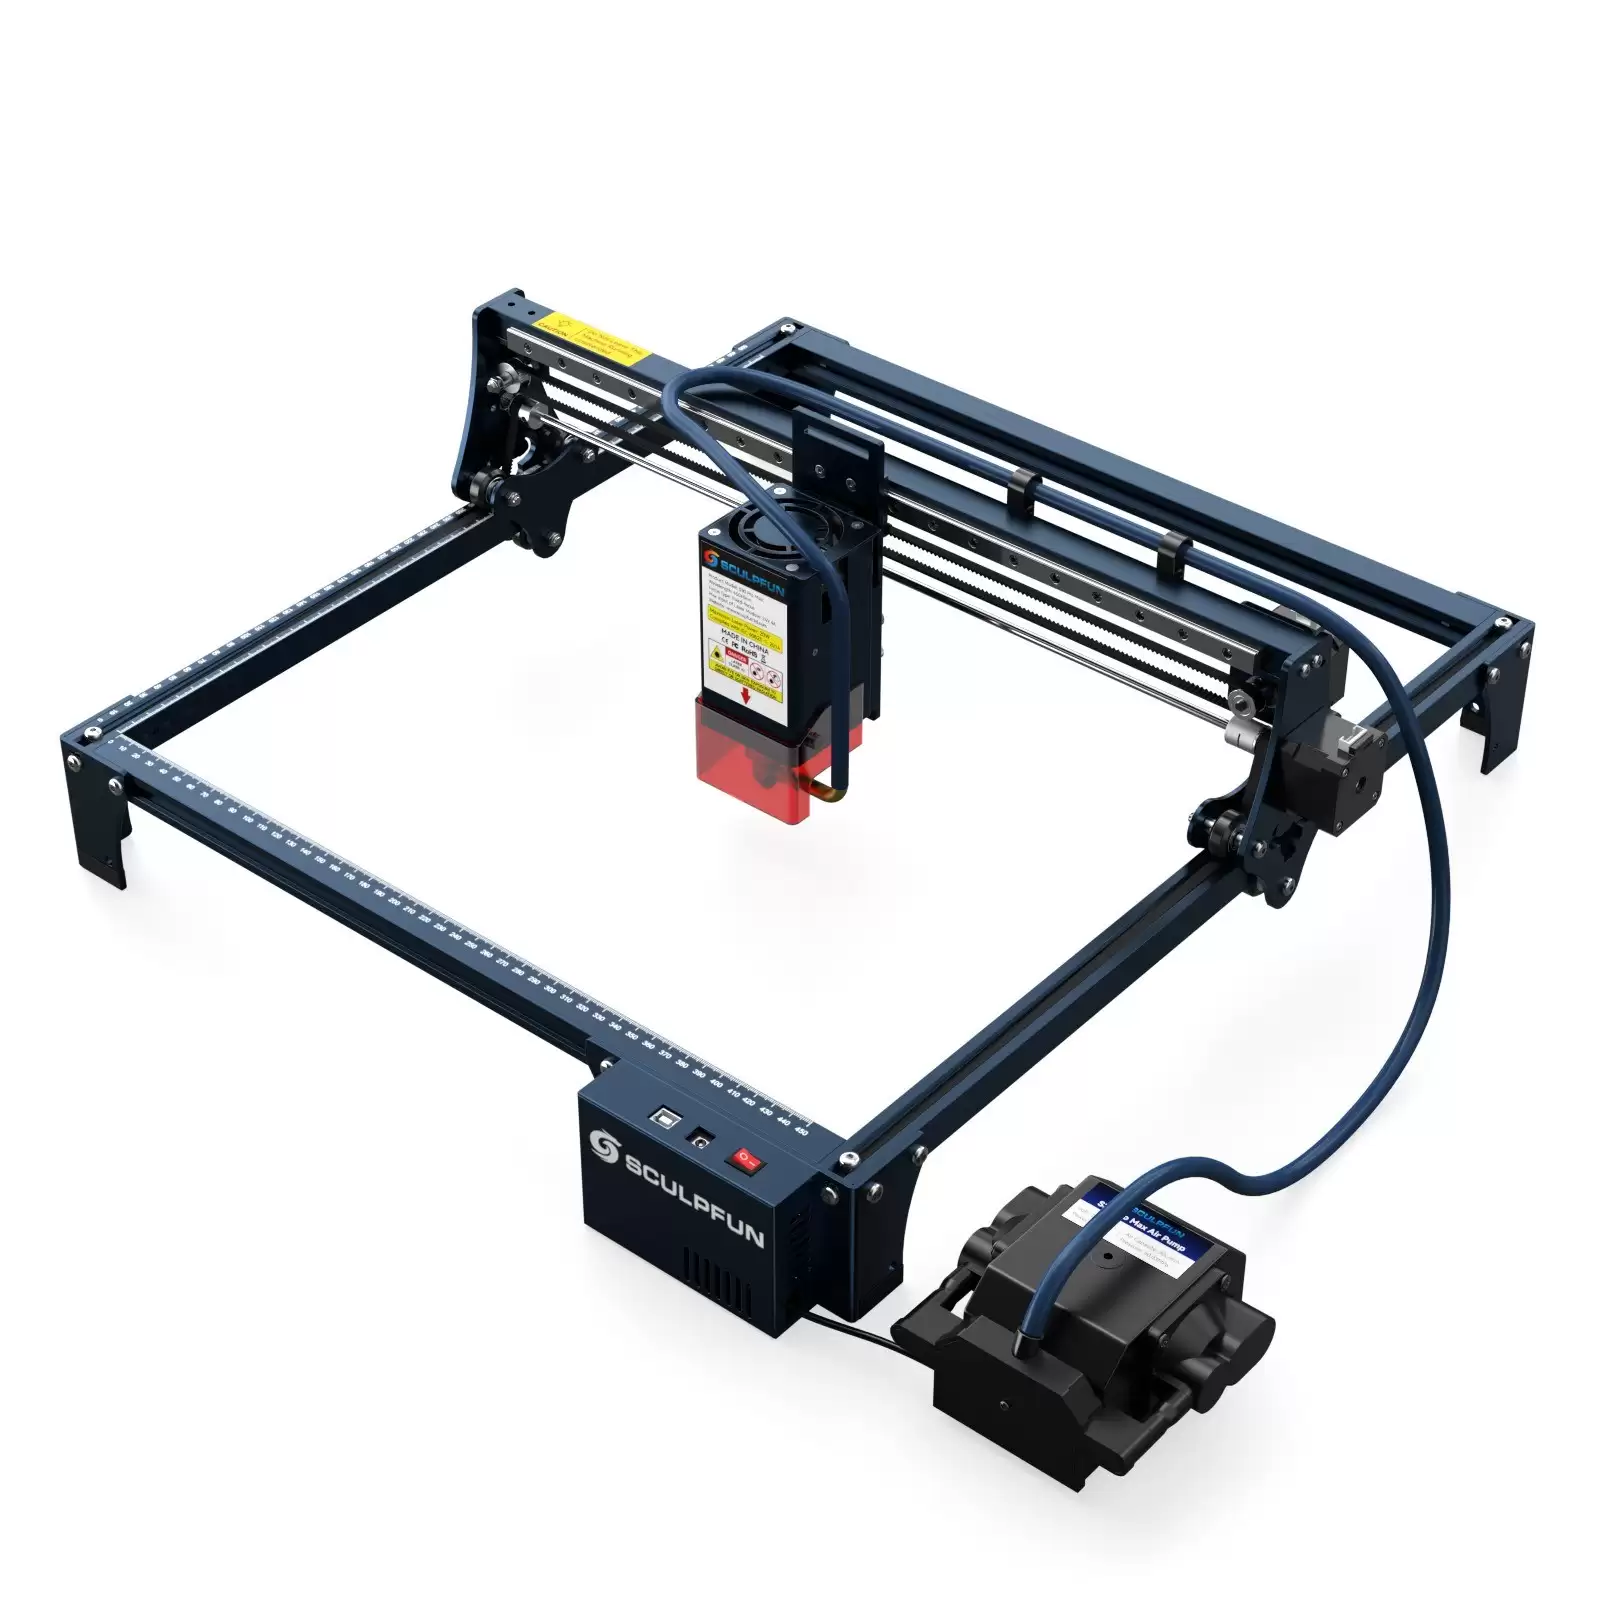 Pay Only $499 For Sculpfun S30 Pro Max 20w Laser Engraver At Cafago